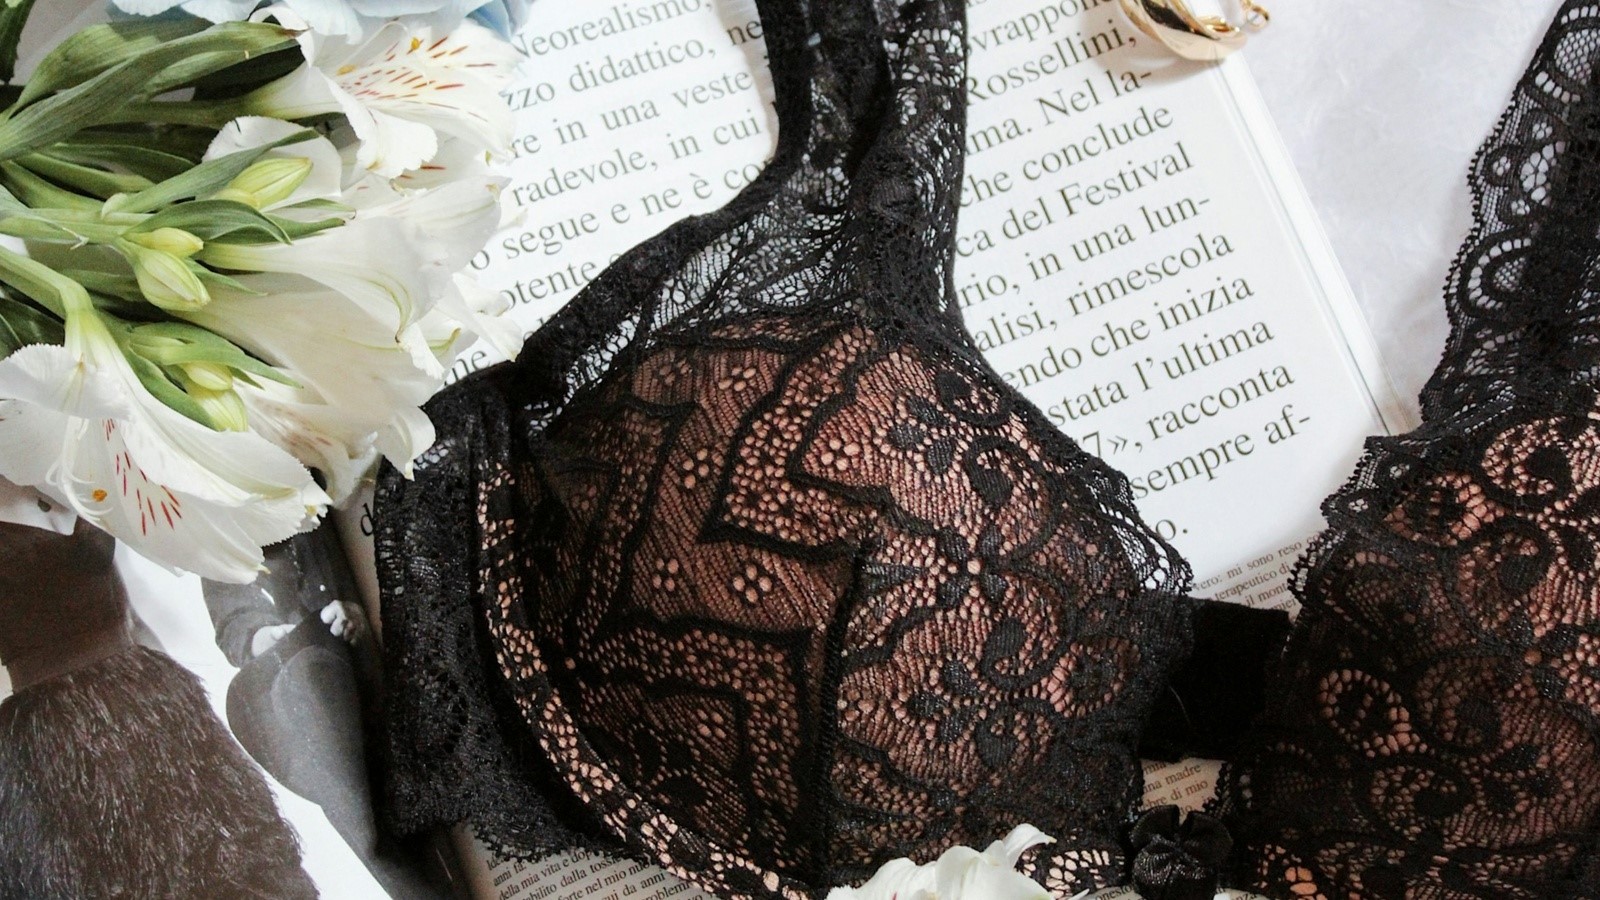 Finding the Perfect Pattern - Bra-makers Supply the leading global source  for bra making and corset making supplies